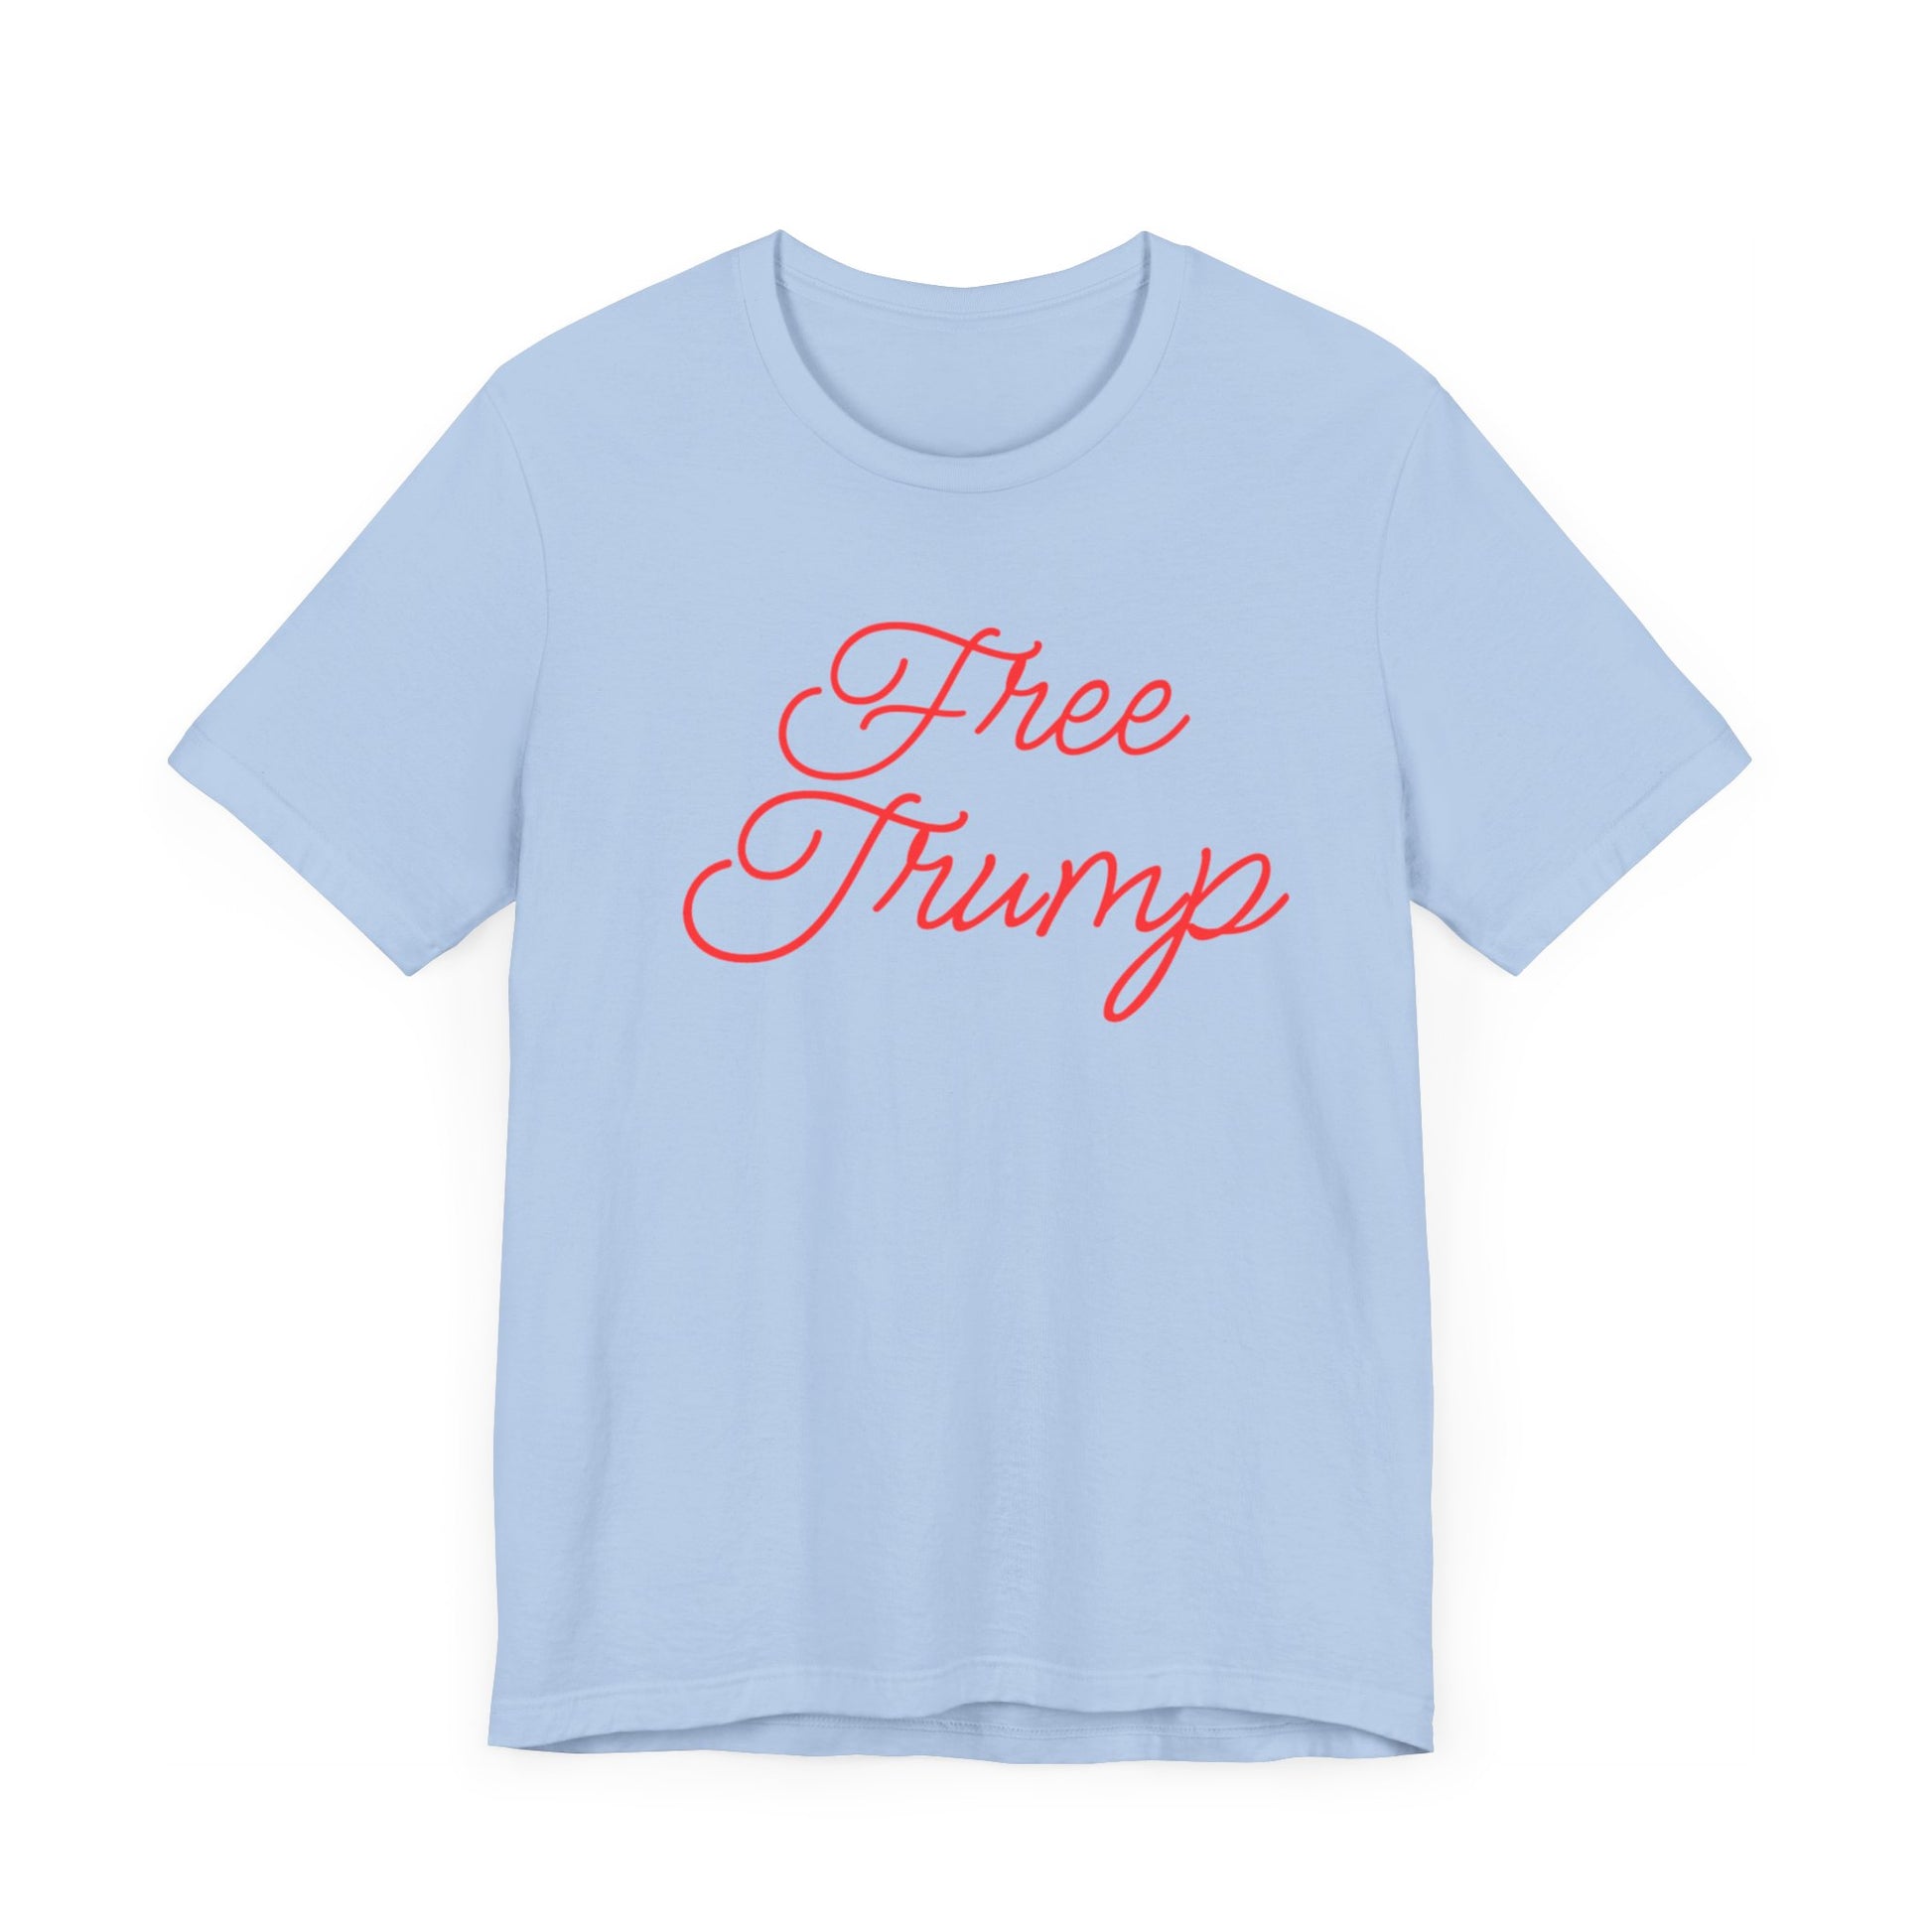 Get trendy with "Free Trump" Unisex Jersey Short Sleeve Tee Red cursive Text - T-Shirt available at Good Gift Company. Grab yours for $16 today!